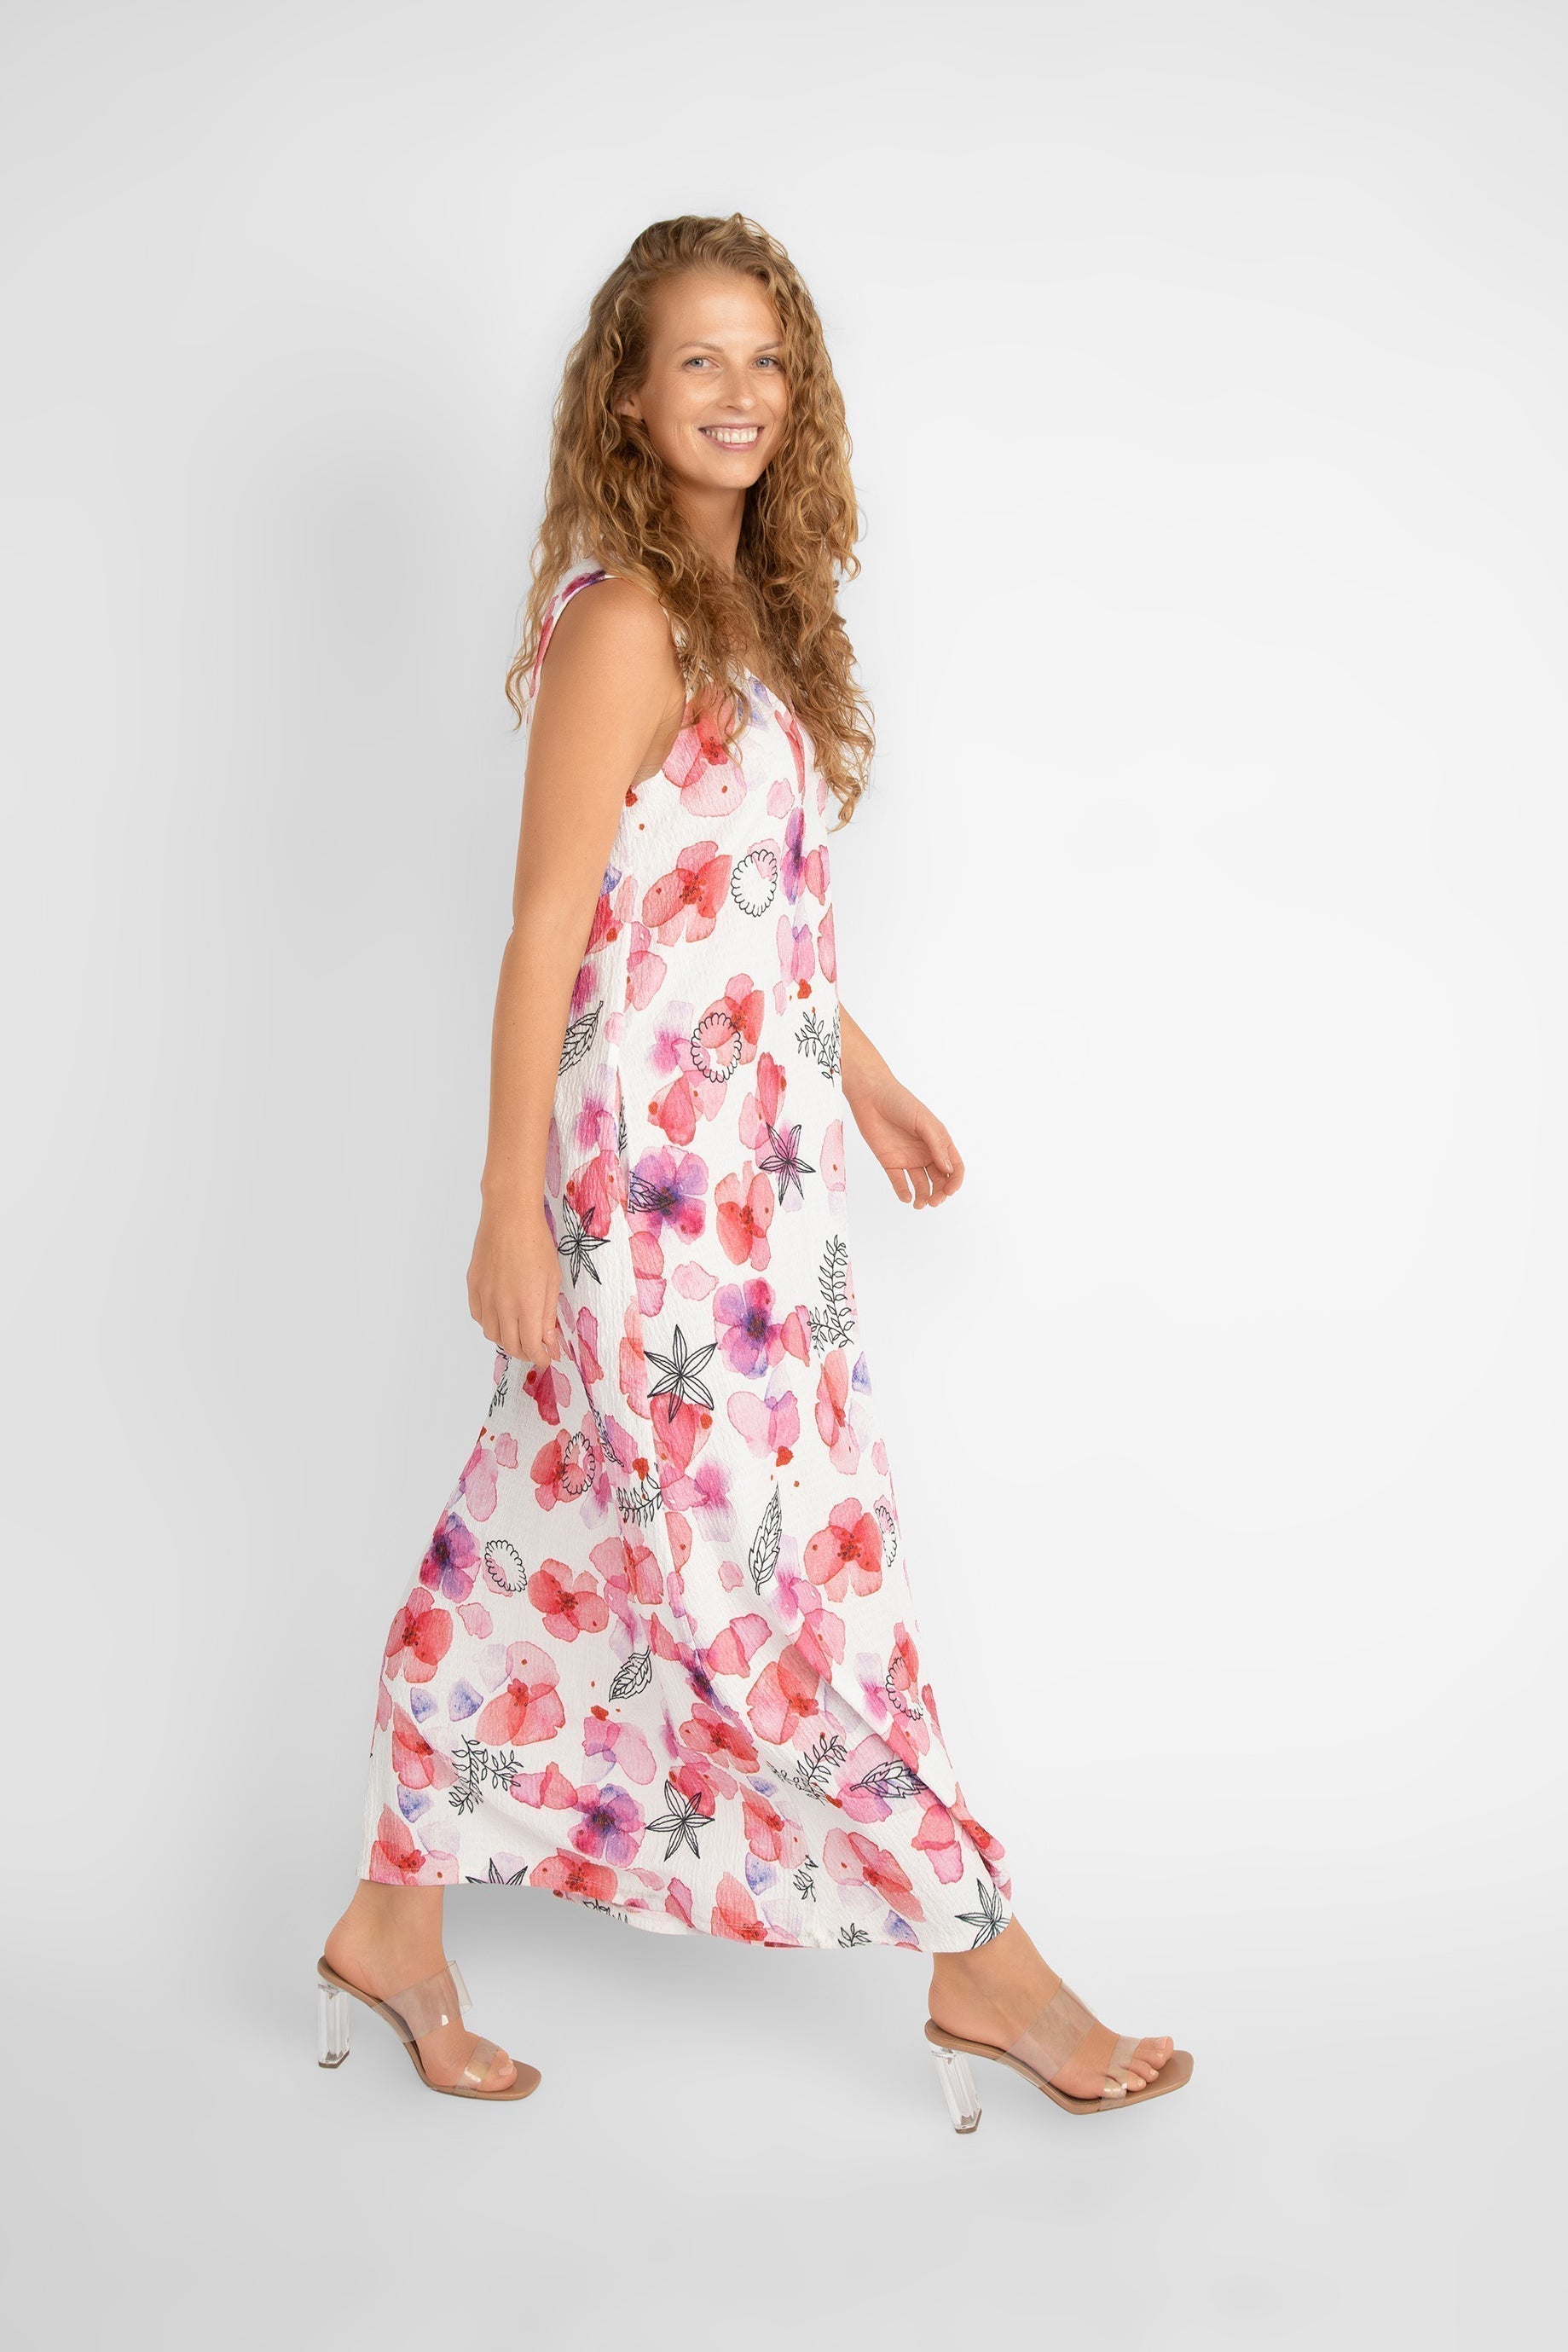 Side view of Compli K (33565) Women's Sleeveless V-neck Printed Maxi Dress in a White with Pink Florals and Black Illustrations